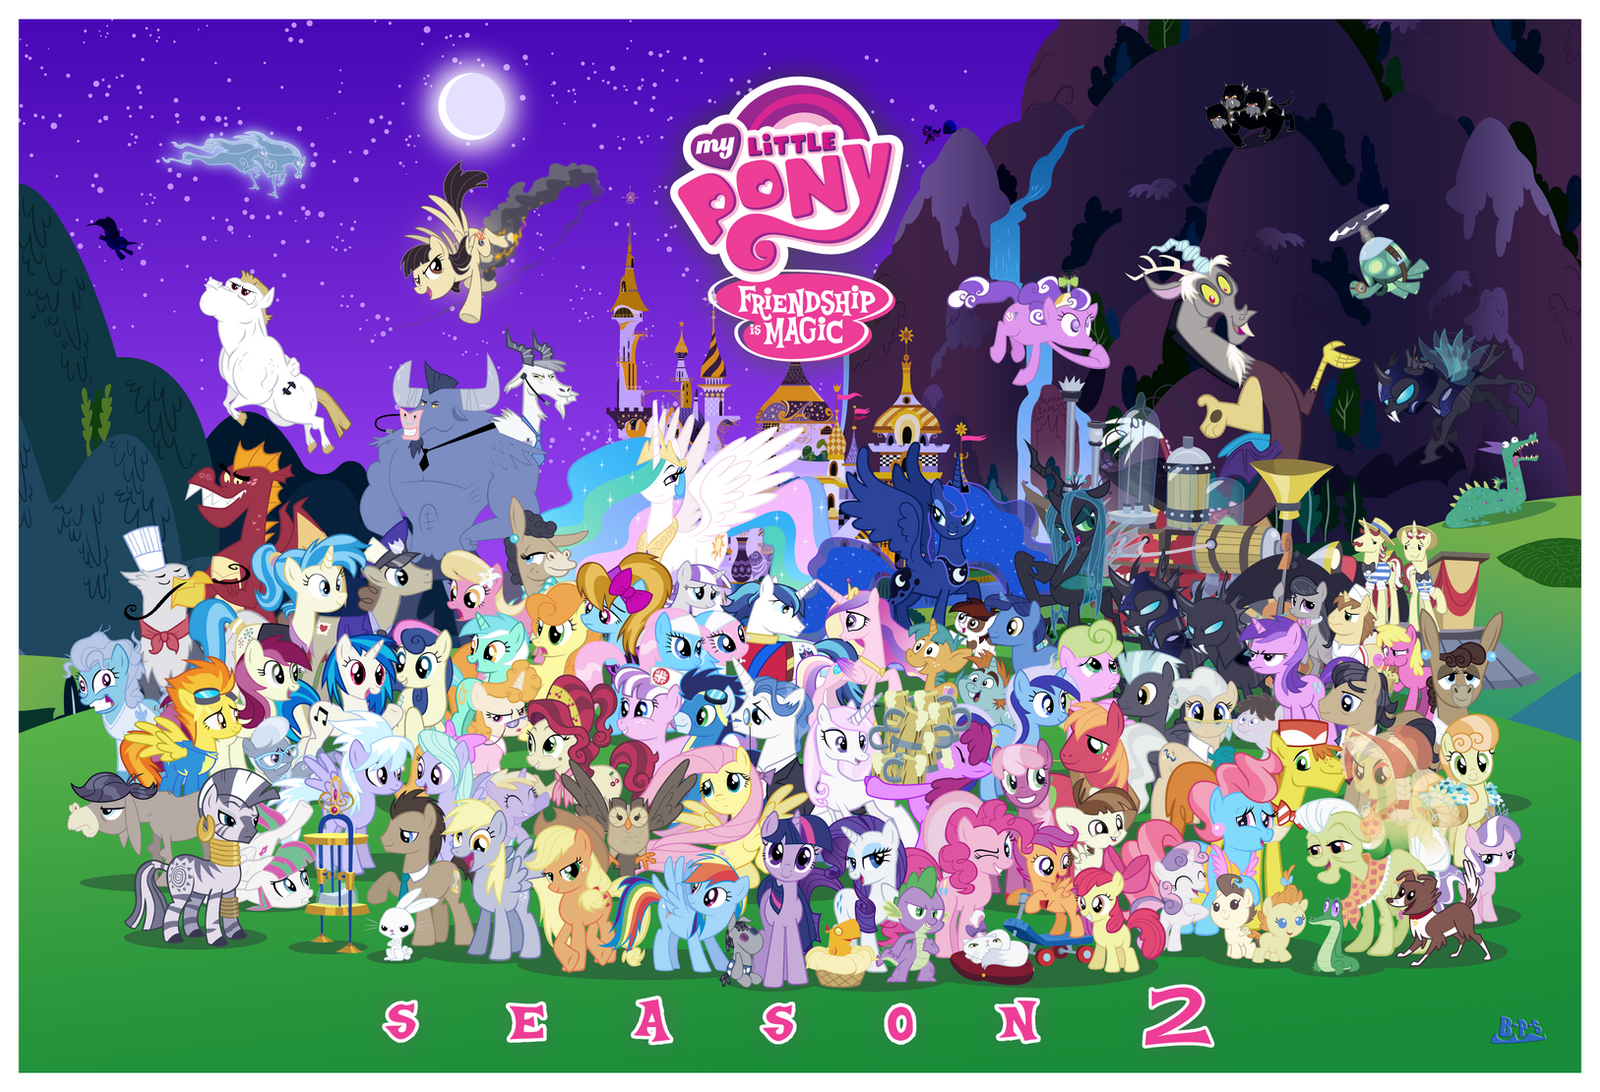 mlp_fim_s2_character_cluster_fun__update_1__by_blue_paint_sea-d4xfkf5.png